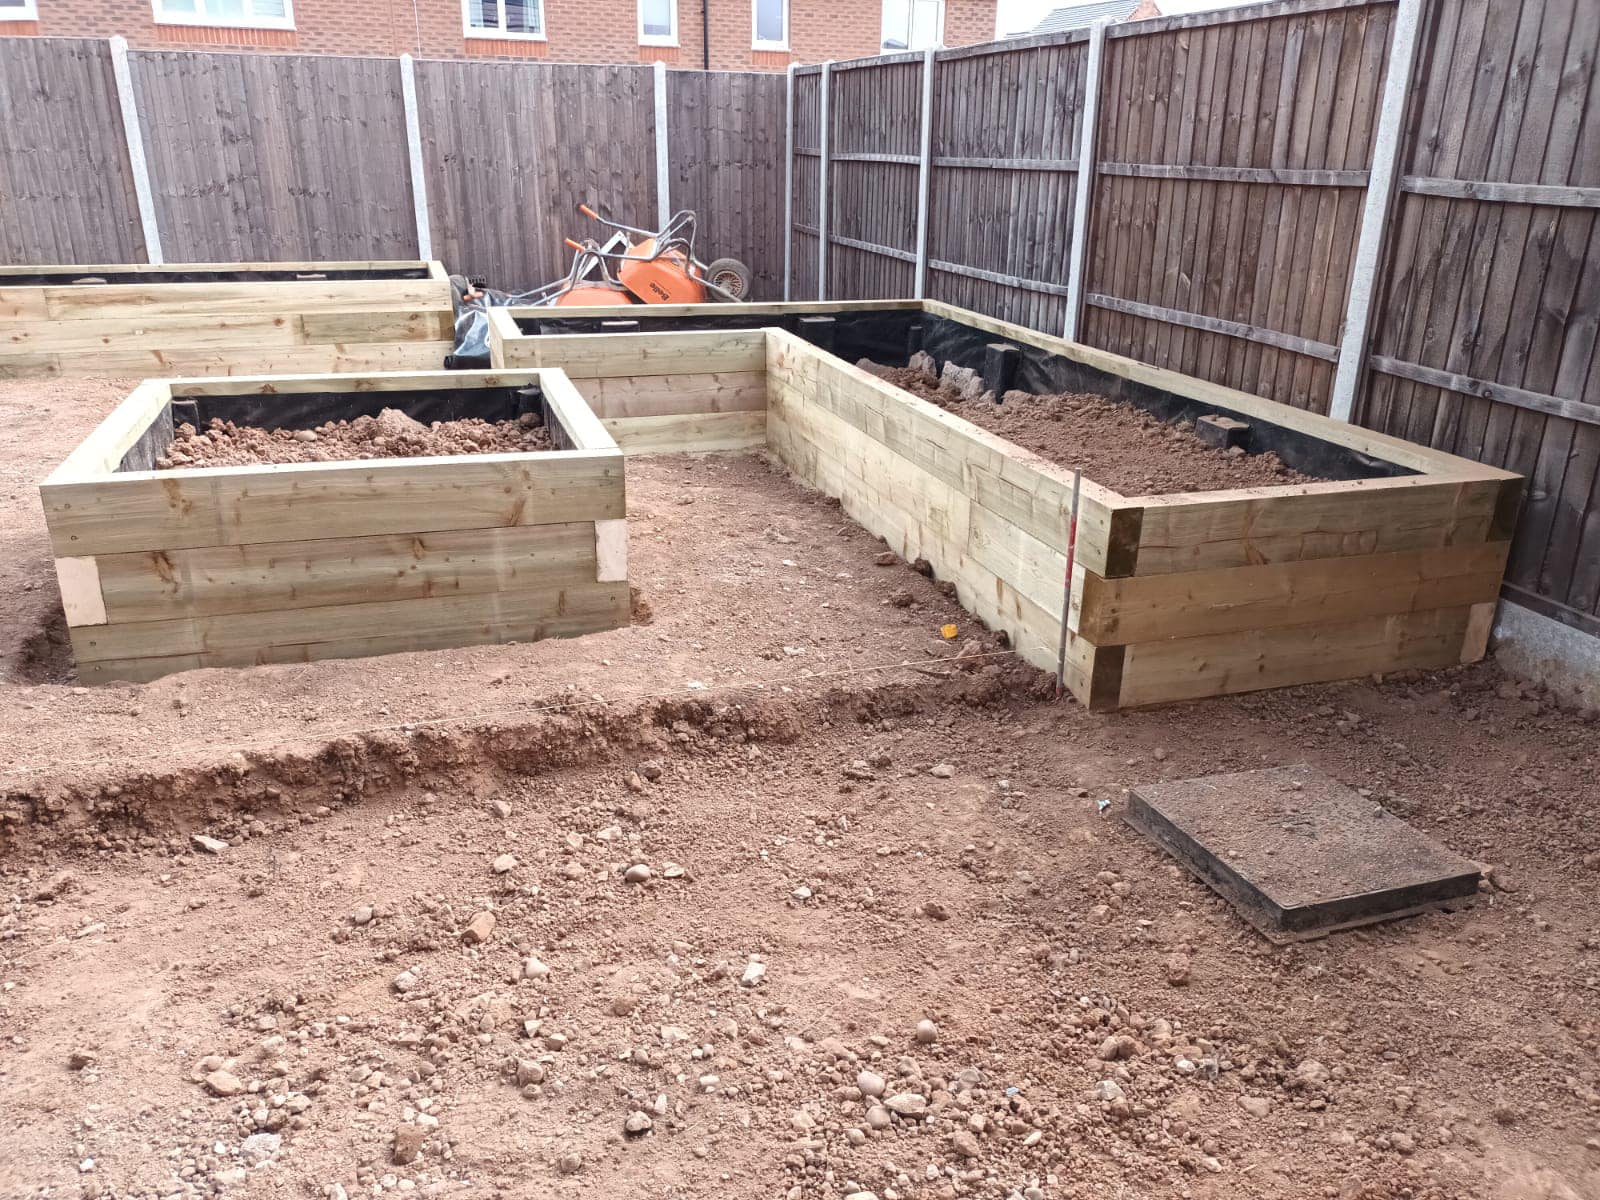 Cottage of Suburbia - During - Raised beds being laid with soil